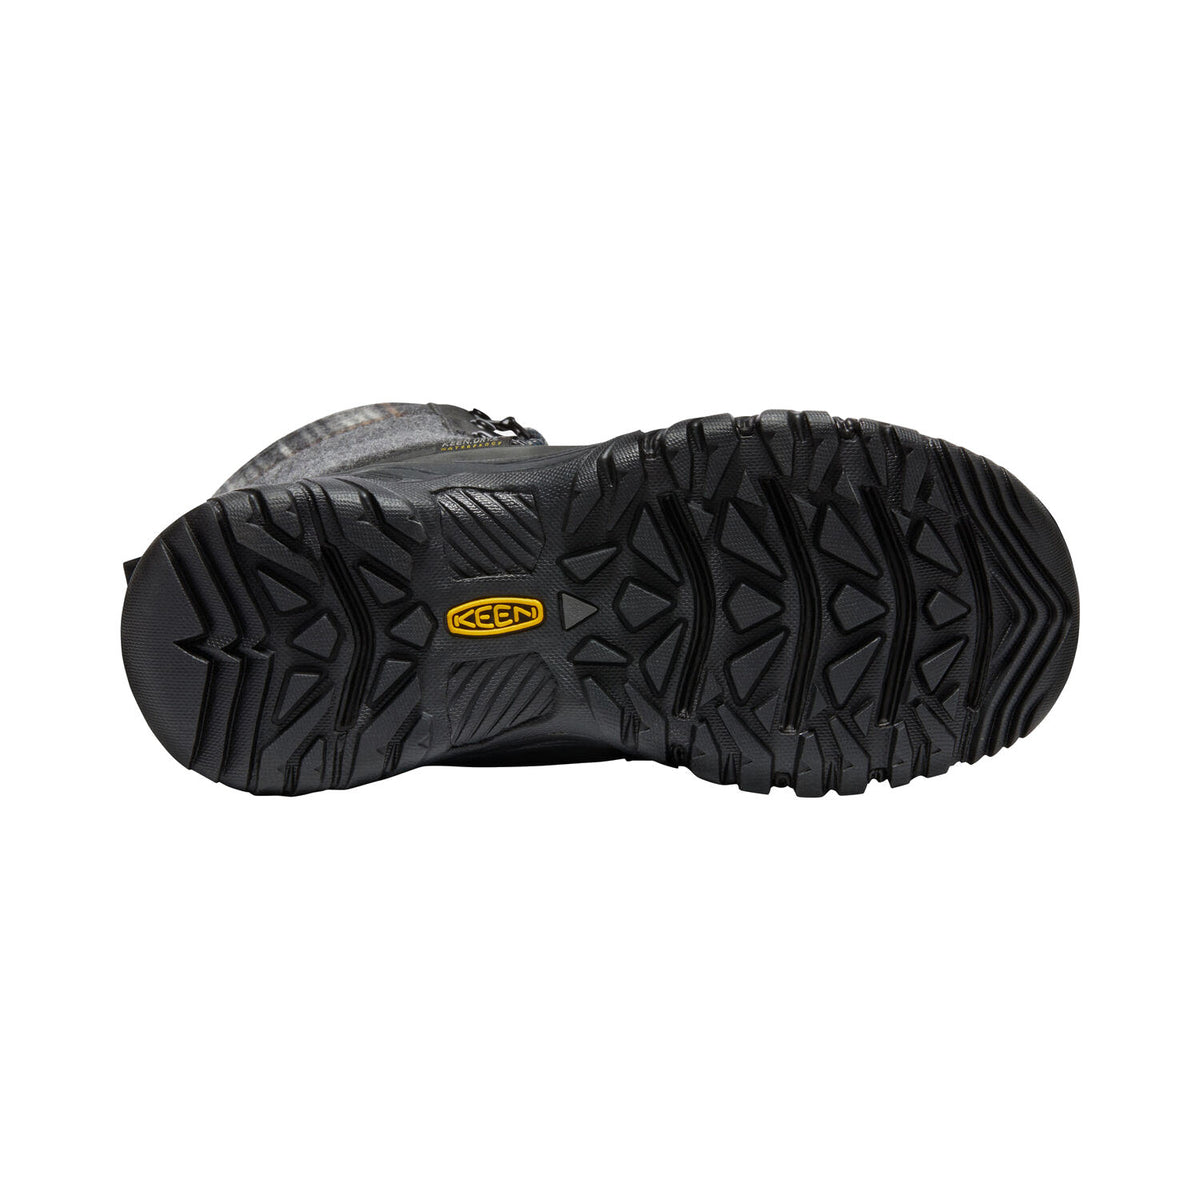 Sole of a Keen KEEN GRETA TALL BOOT WP BLACK - WOMENS with a black tread pattern and the Keen logo.